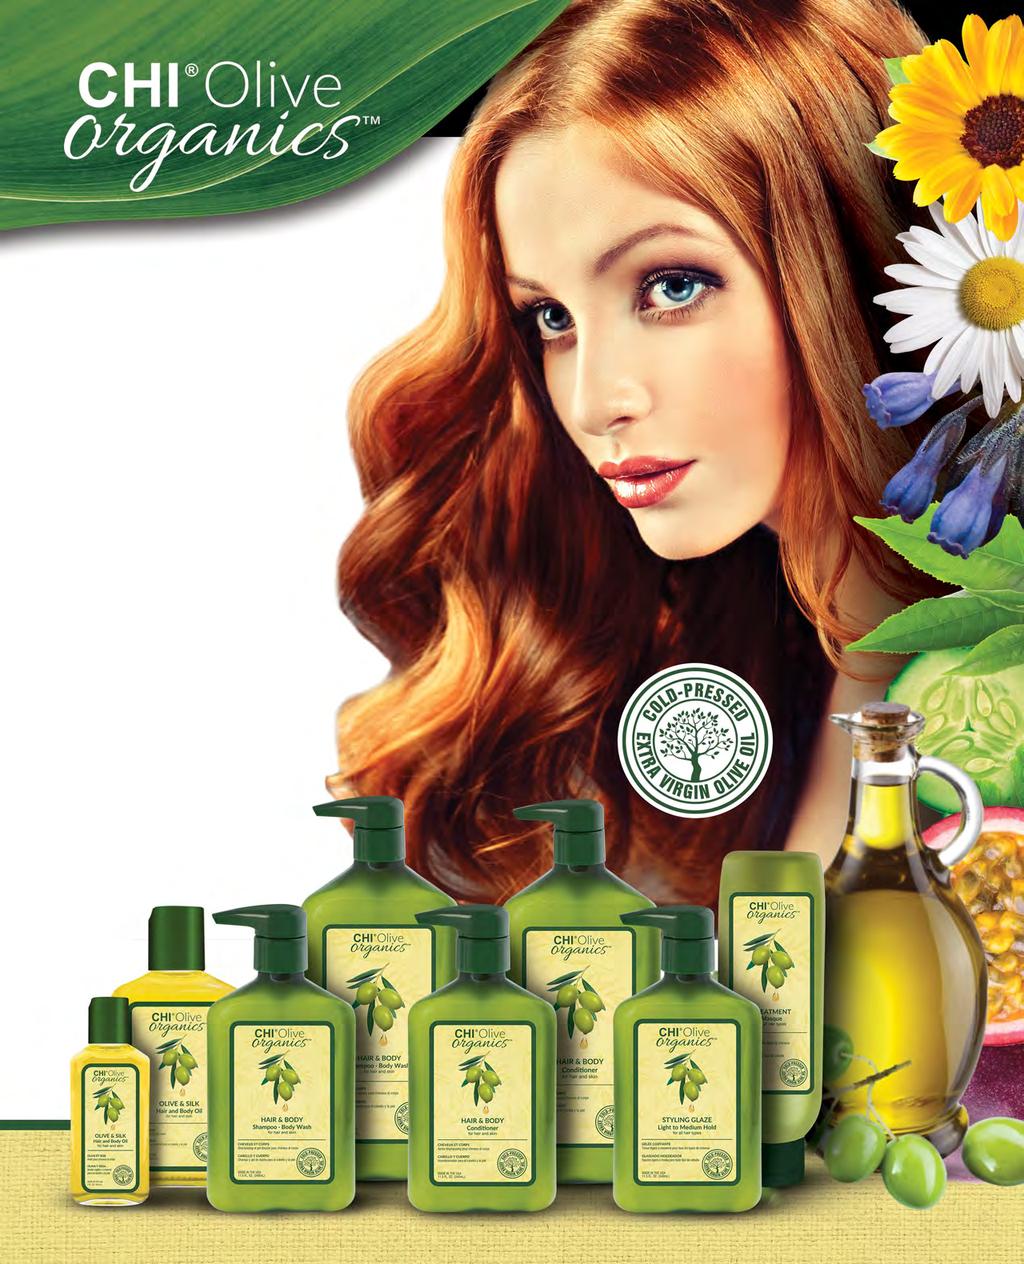 CHI Olive Organics is designed to bring ancient philosophies of health and beauty together with the power of certified organic extra virgin olive oil and botanical ingredients.